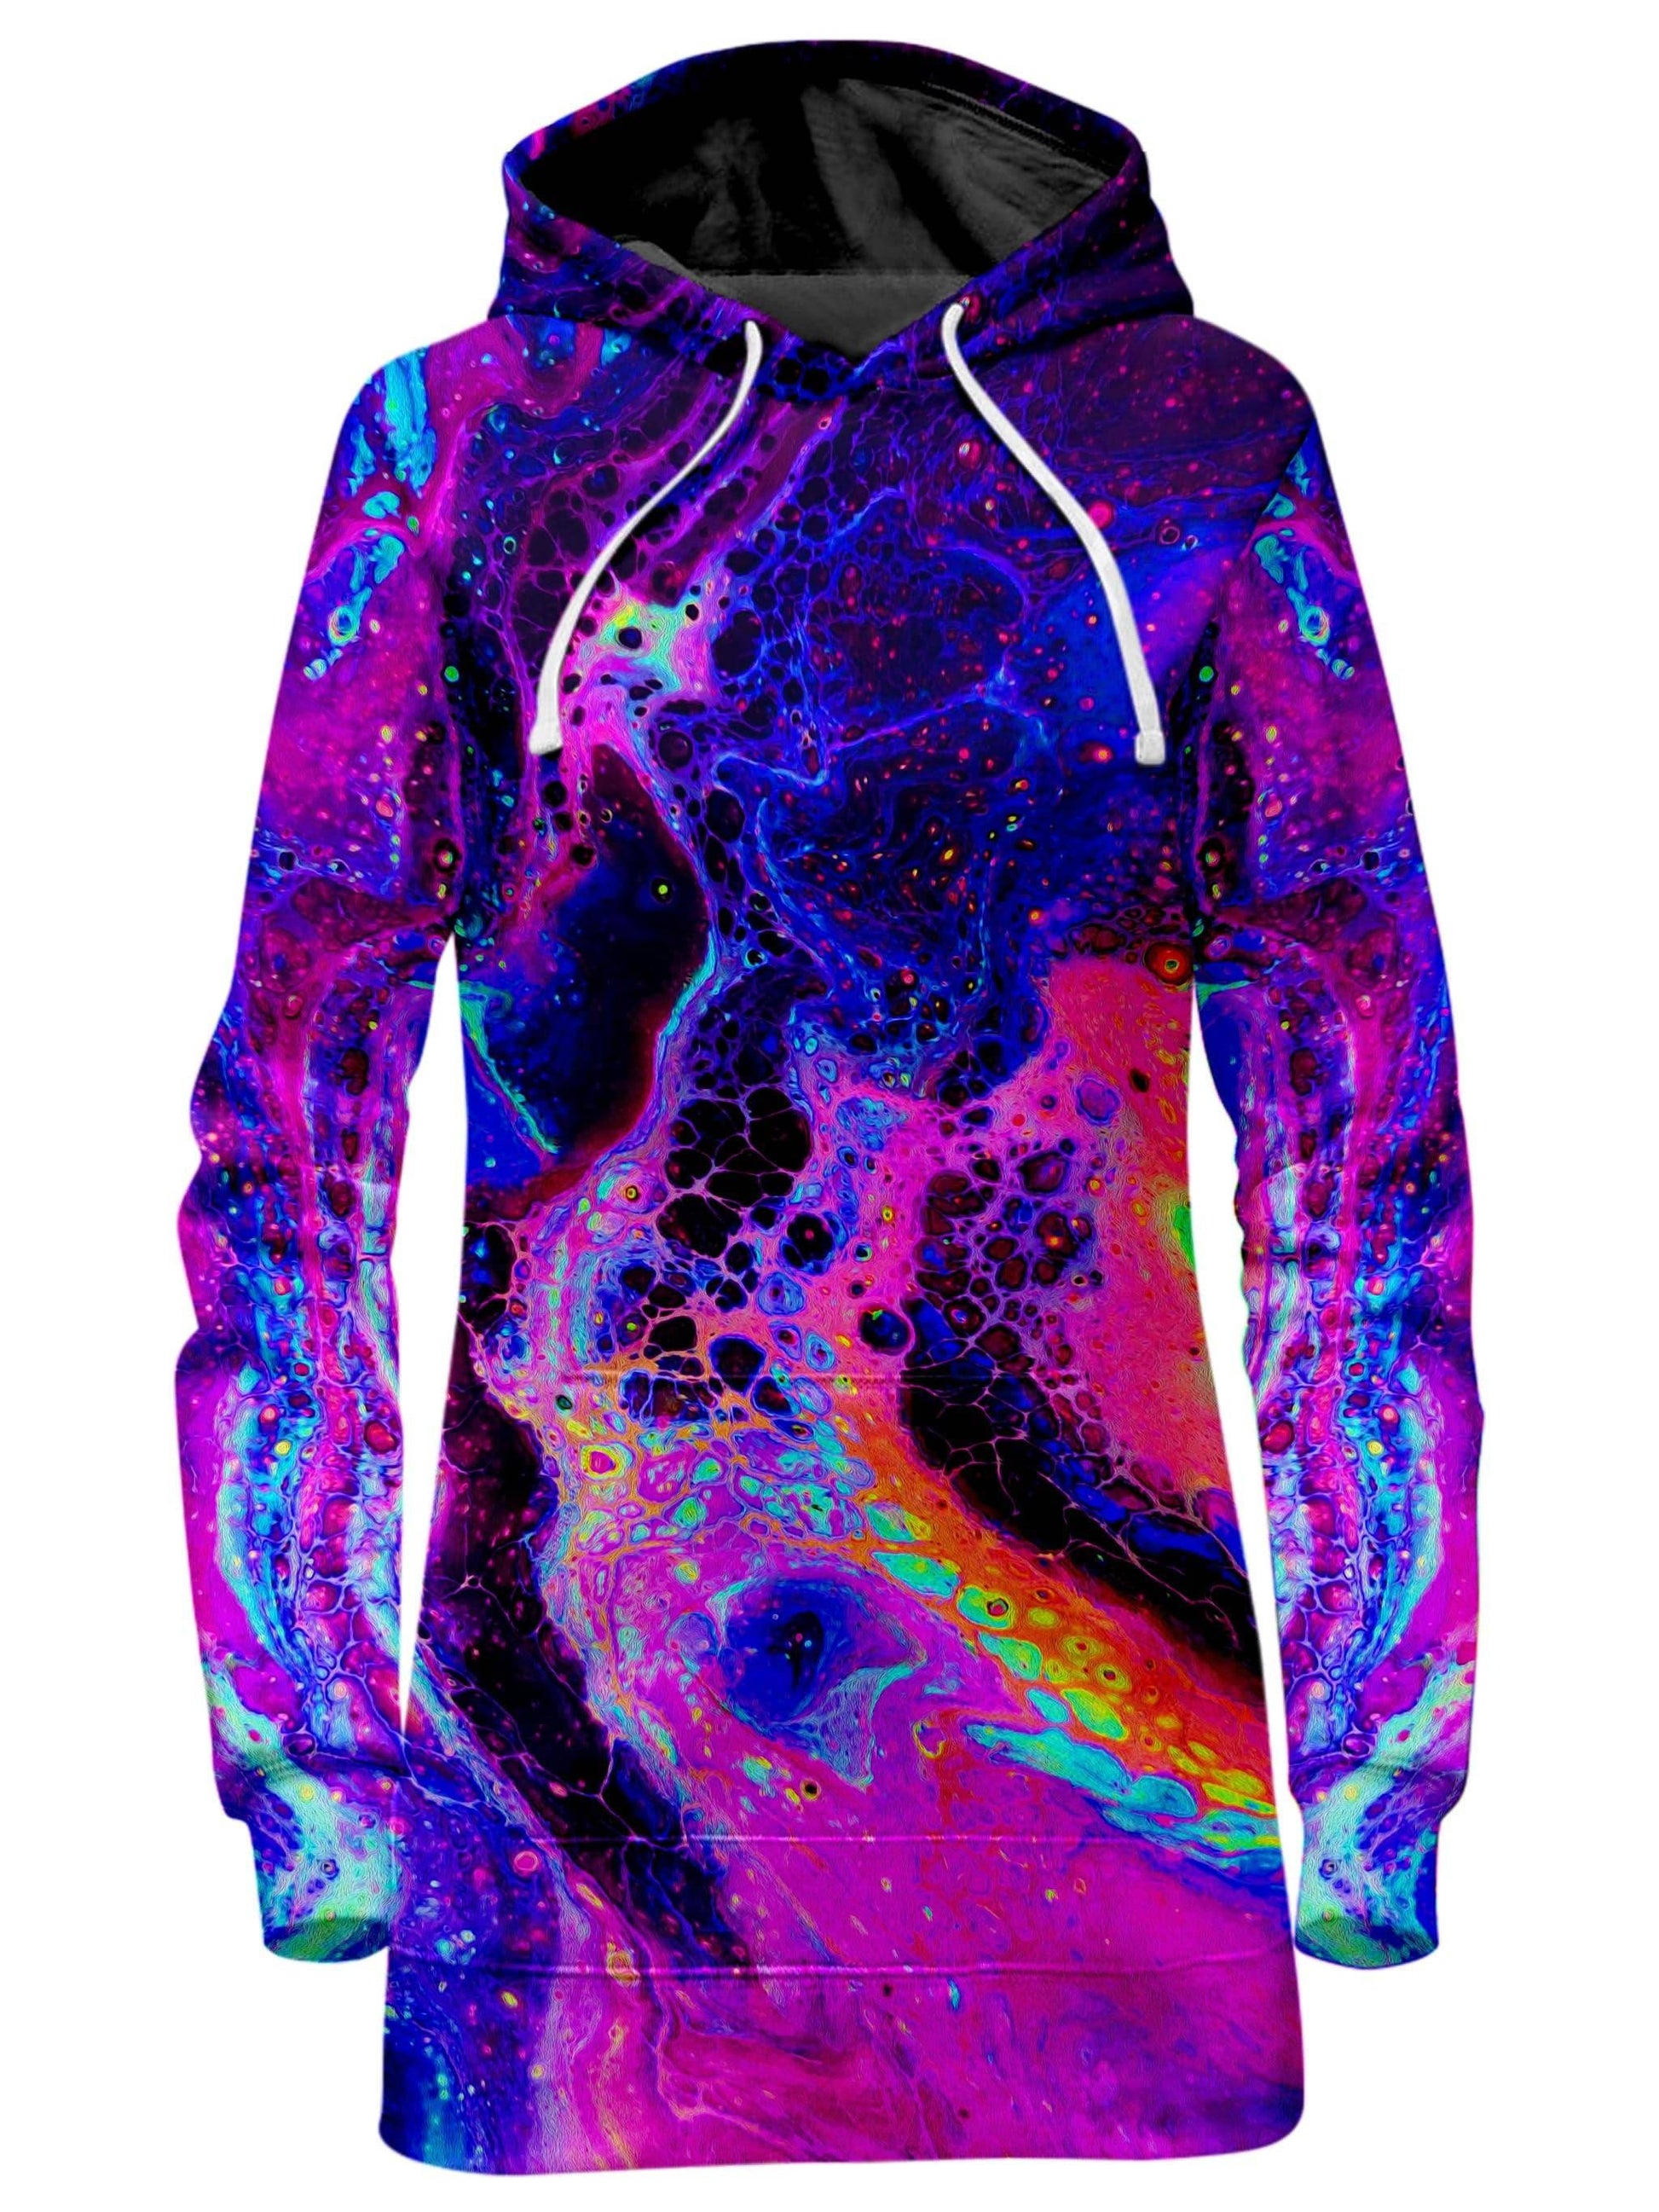 Psychedelic Radiation Hoodie Dress, Psychedelic Pourhouse, | iEDM